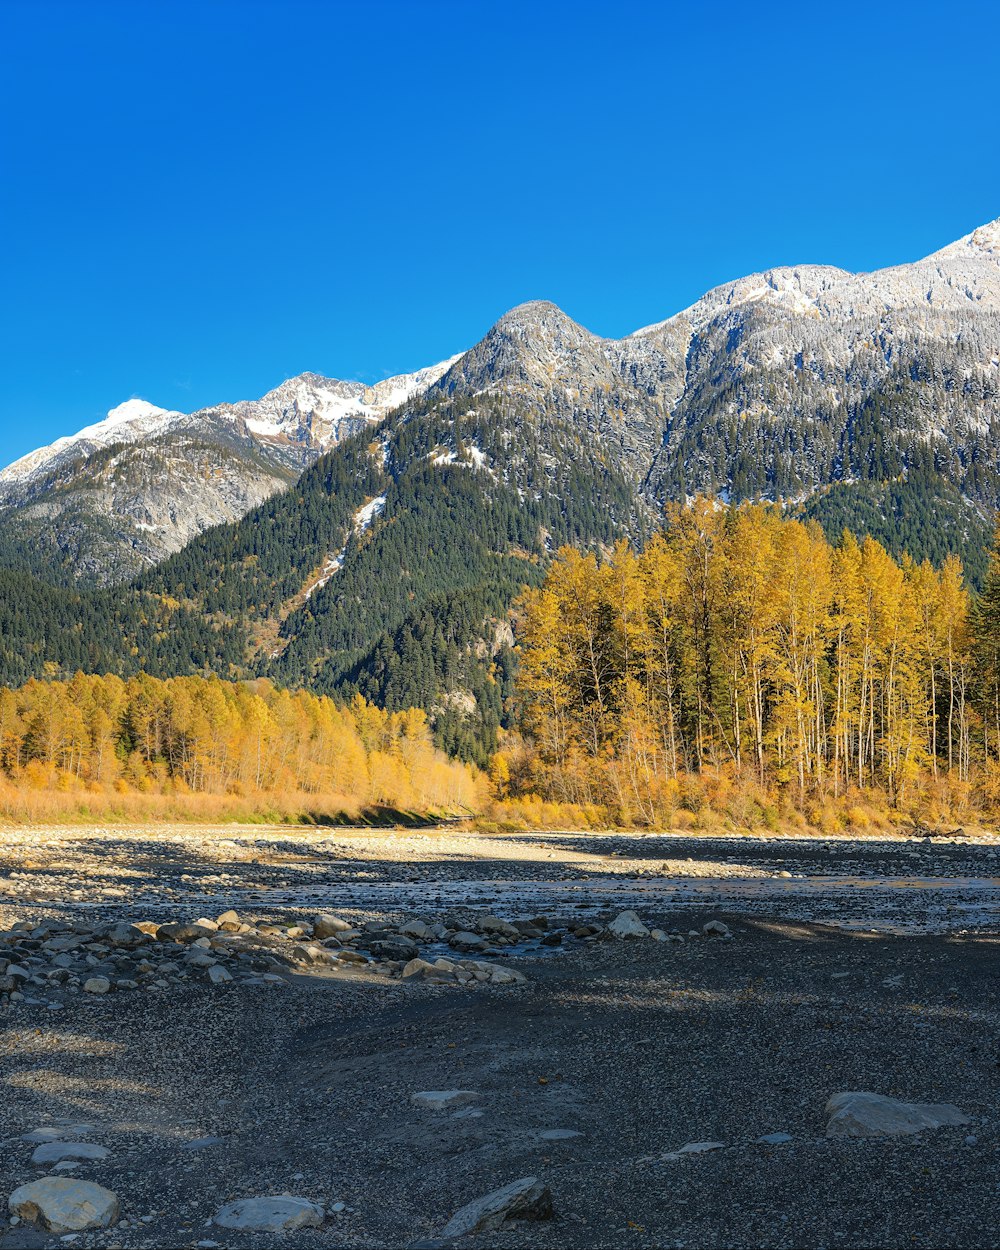 a scenic view of a mountain range with a river in the foreground